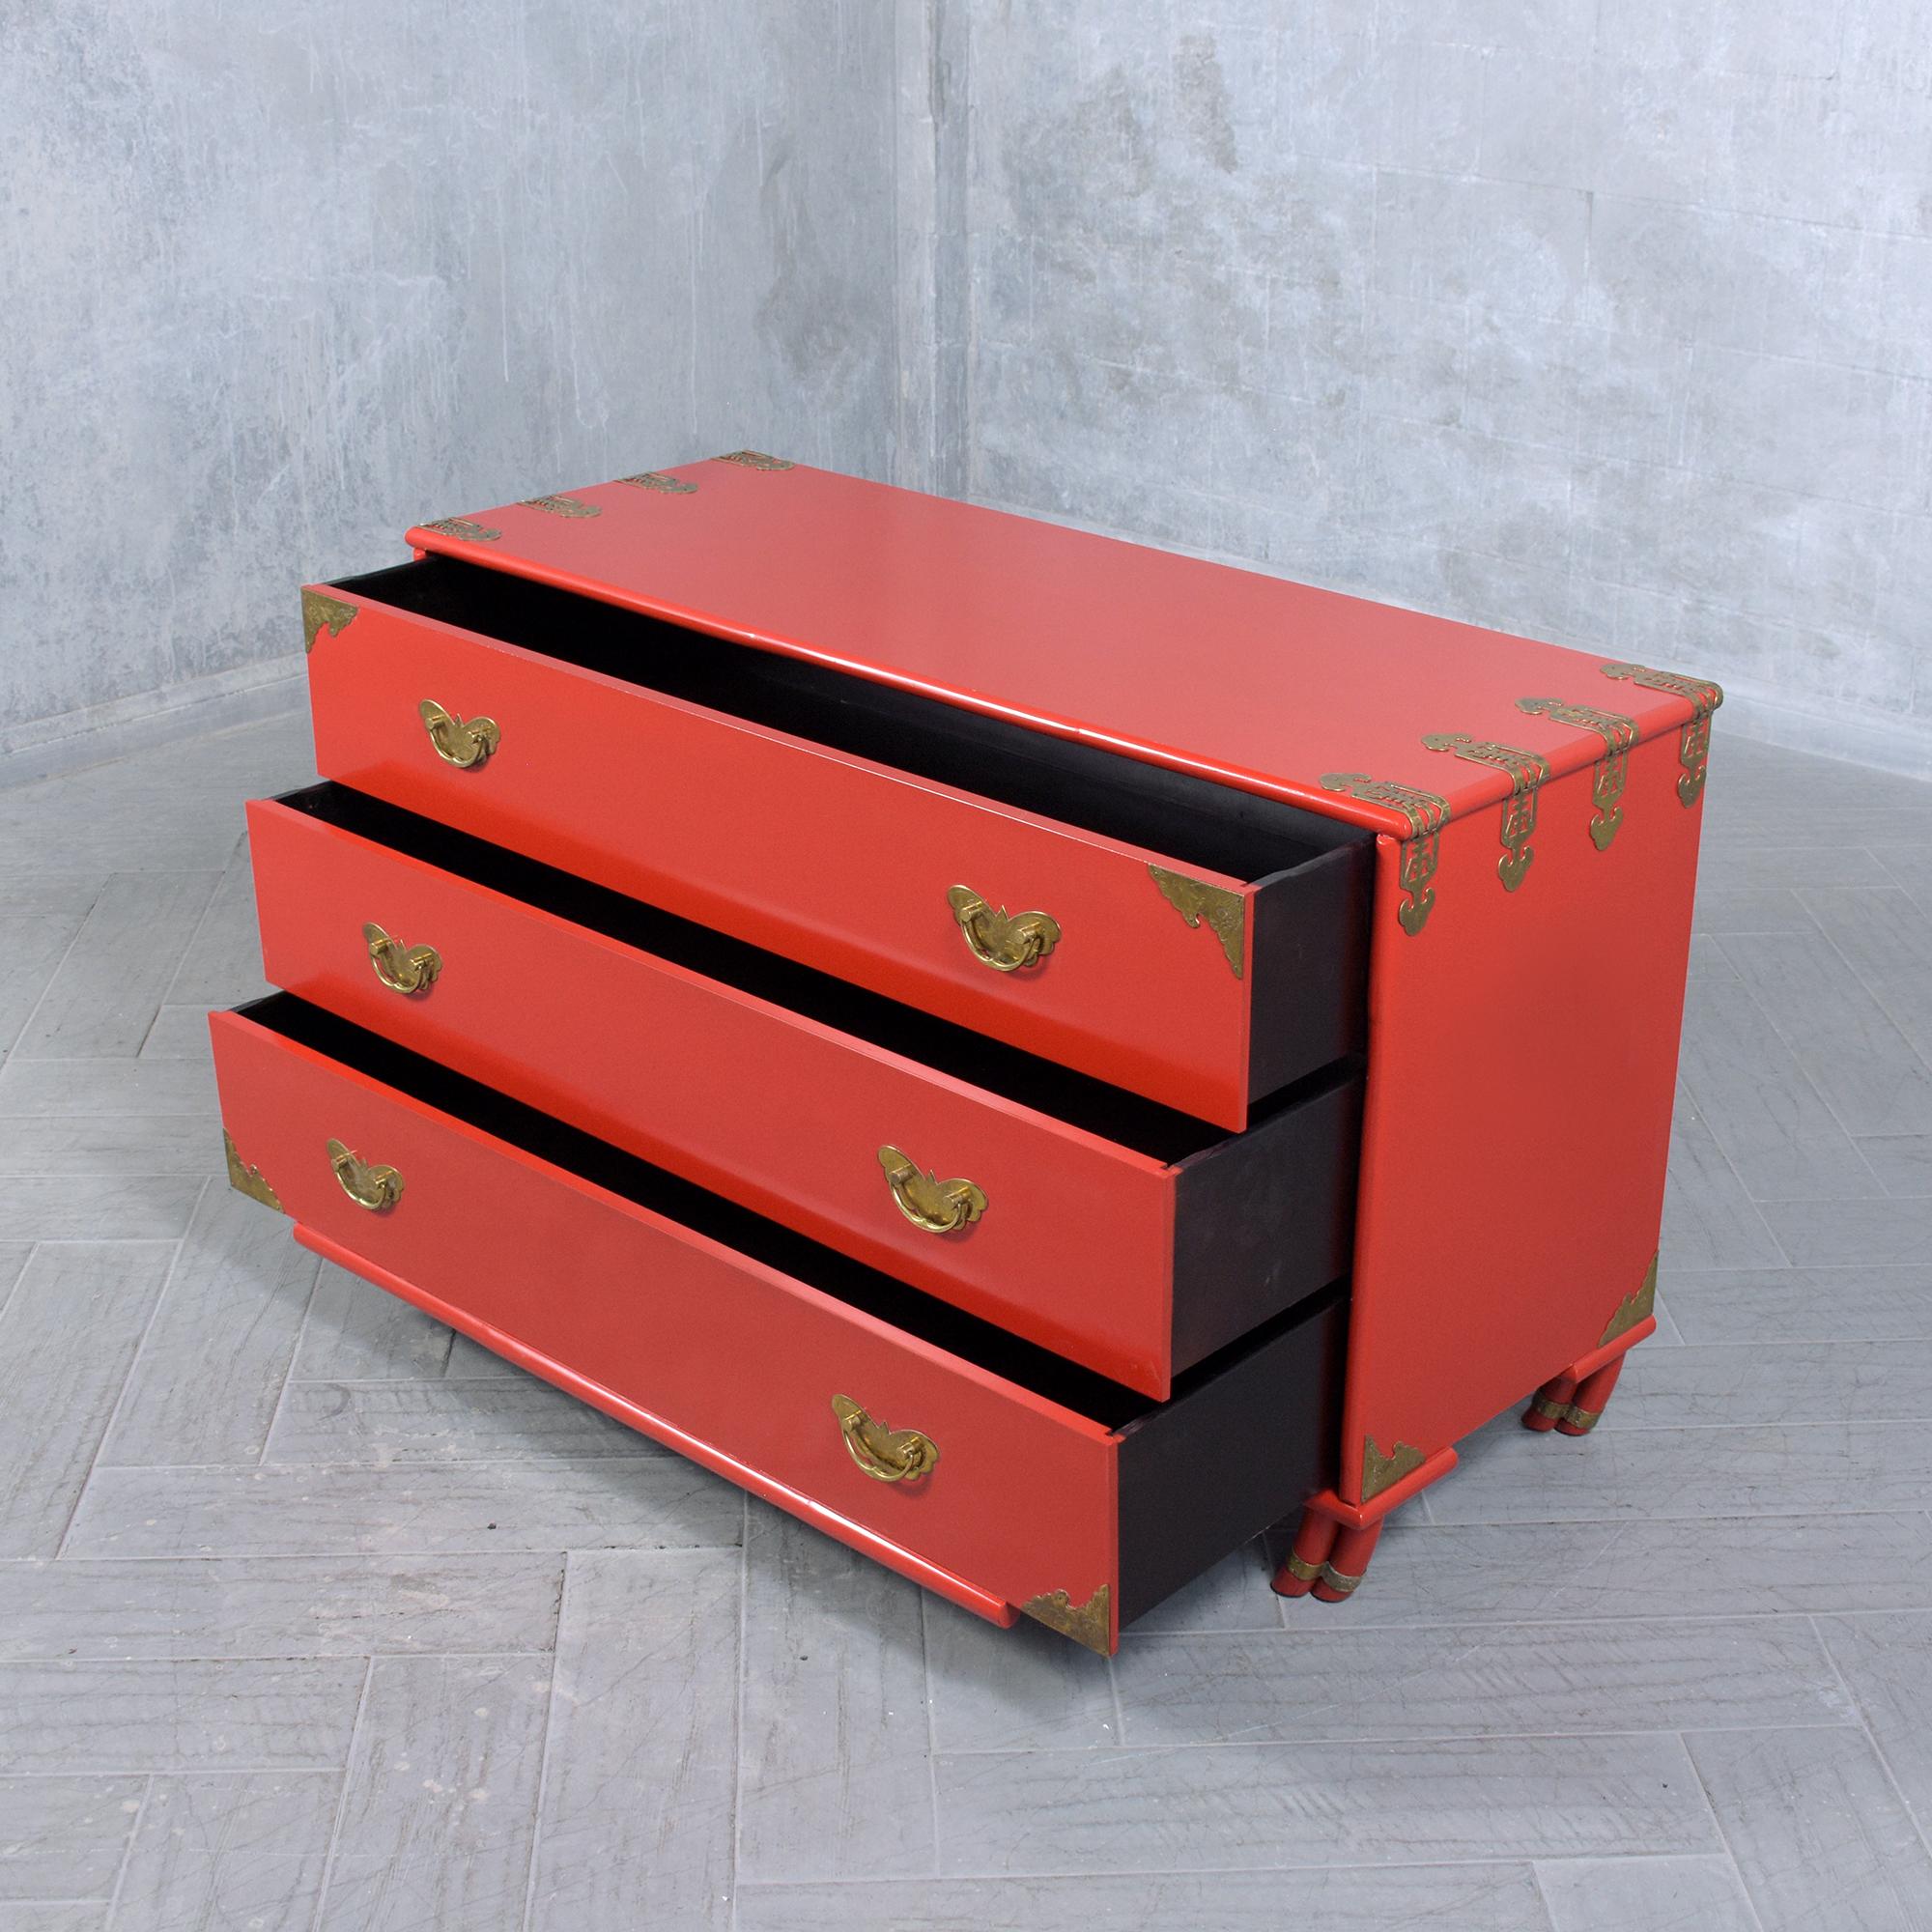 Chinese Stunning Vintage 1970s Red Lacquered Chest of Drawers with Brass Accents